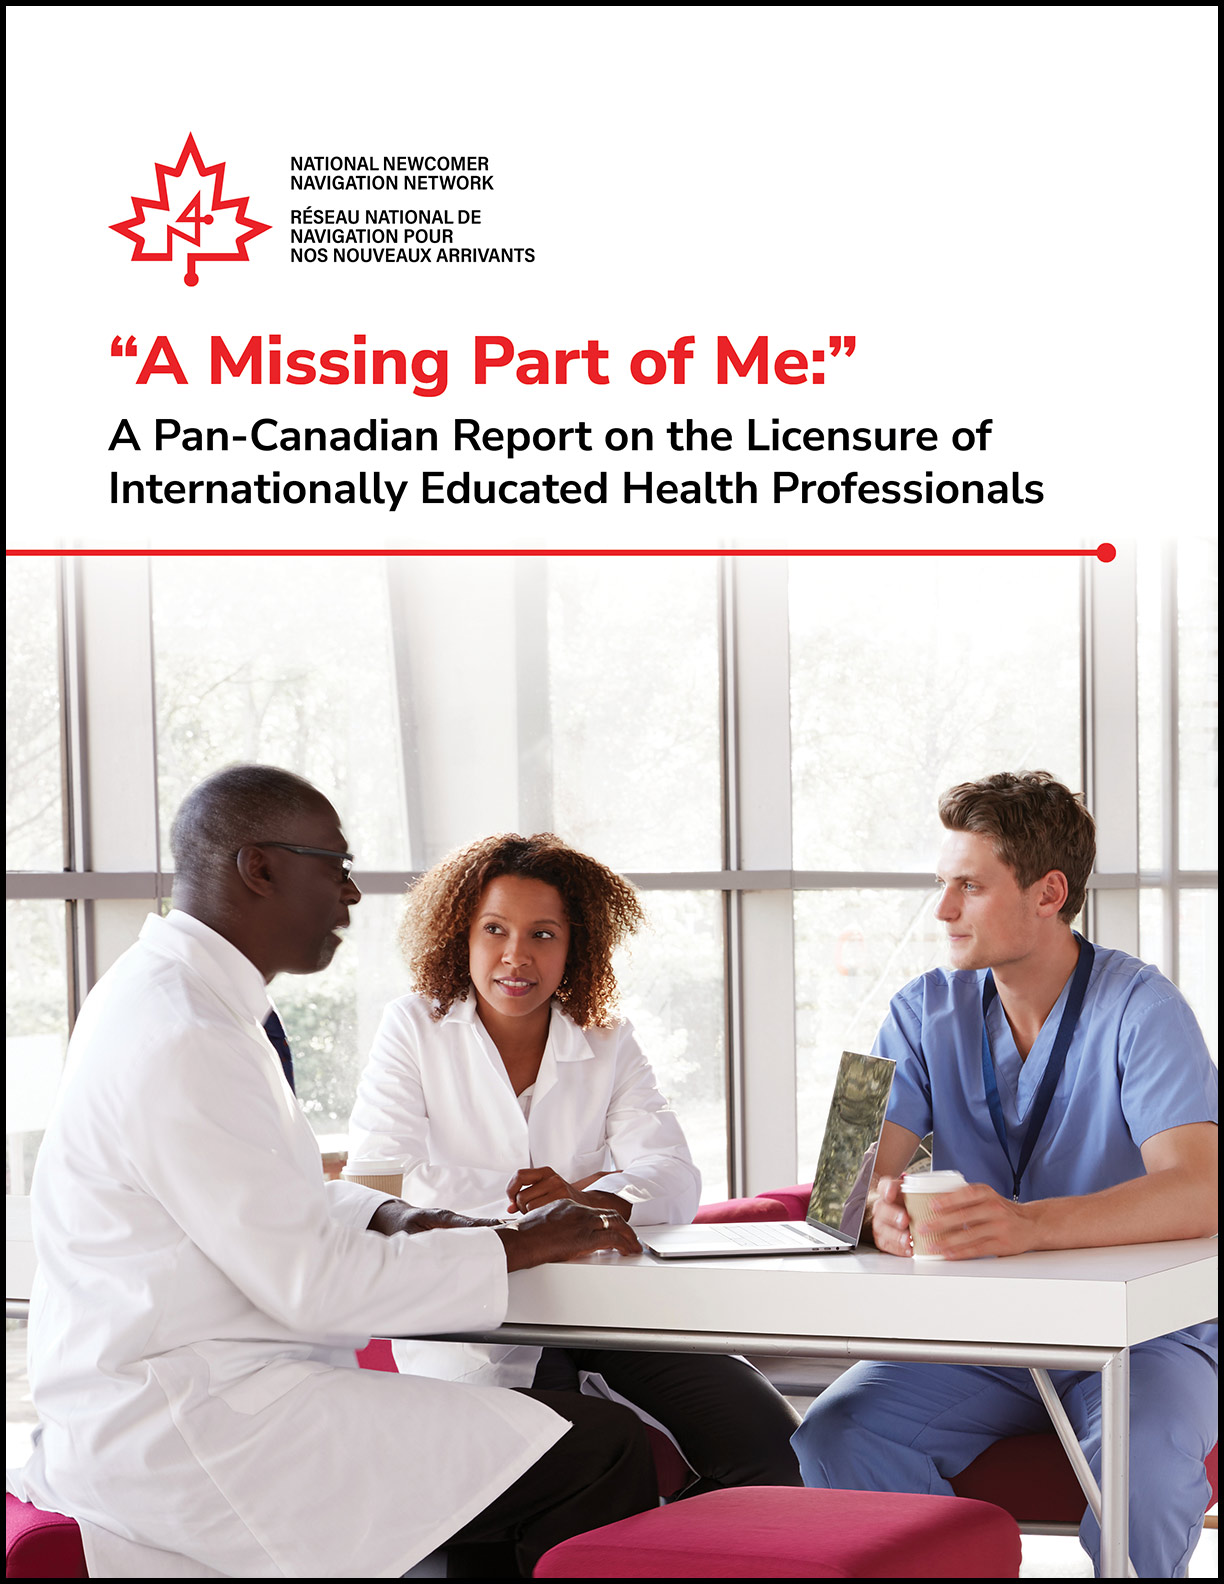 “A Missing Part of Me:” A Pan-Canadian Report on the Licensure of Internationally Educated Health Professionals